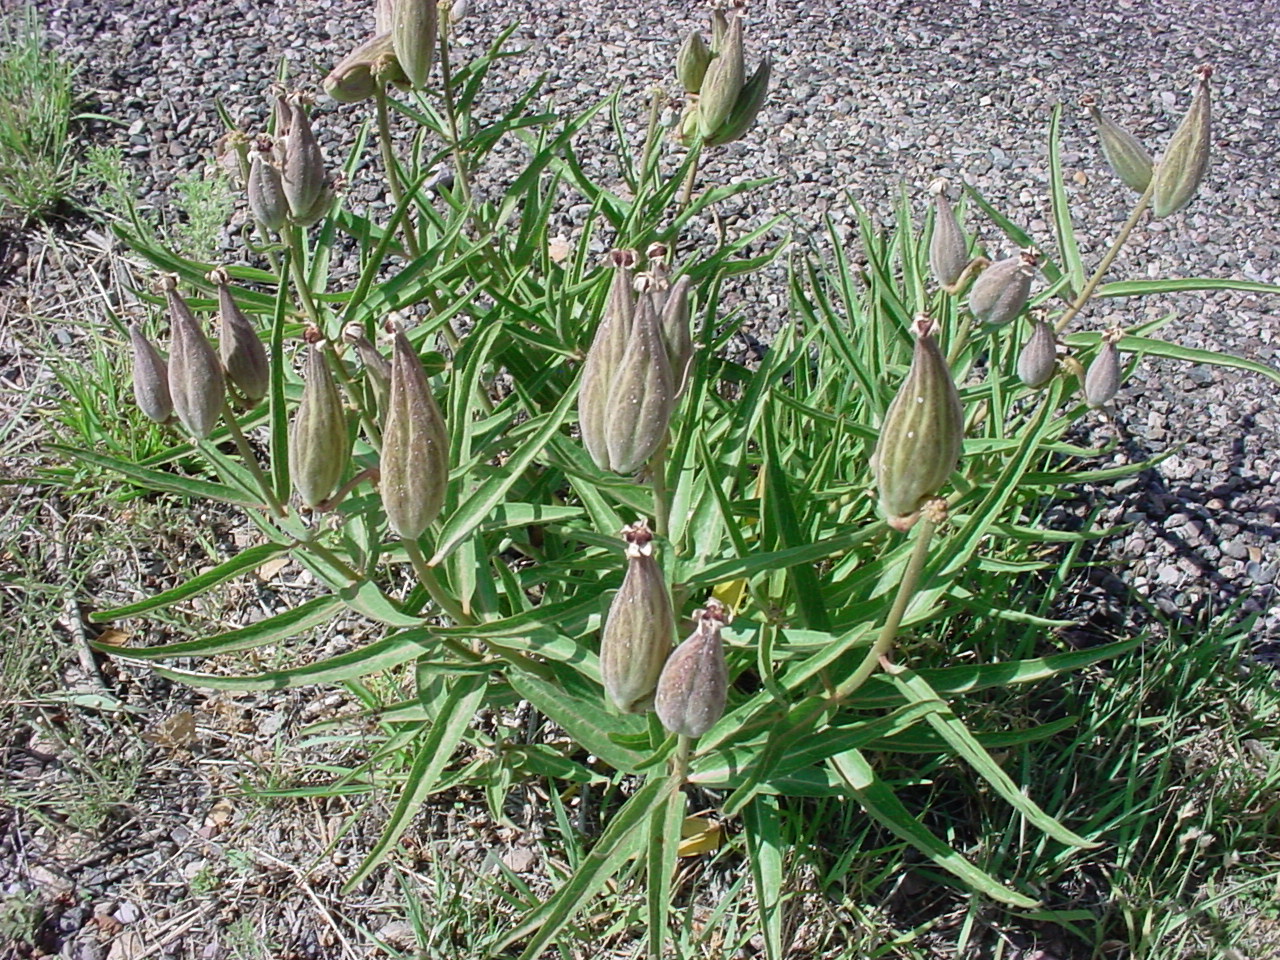 Bulbous seedpods and foliage during growing season